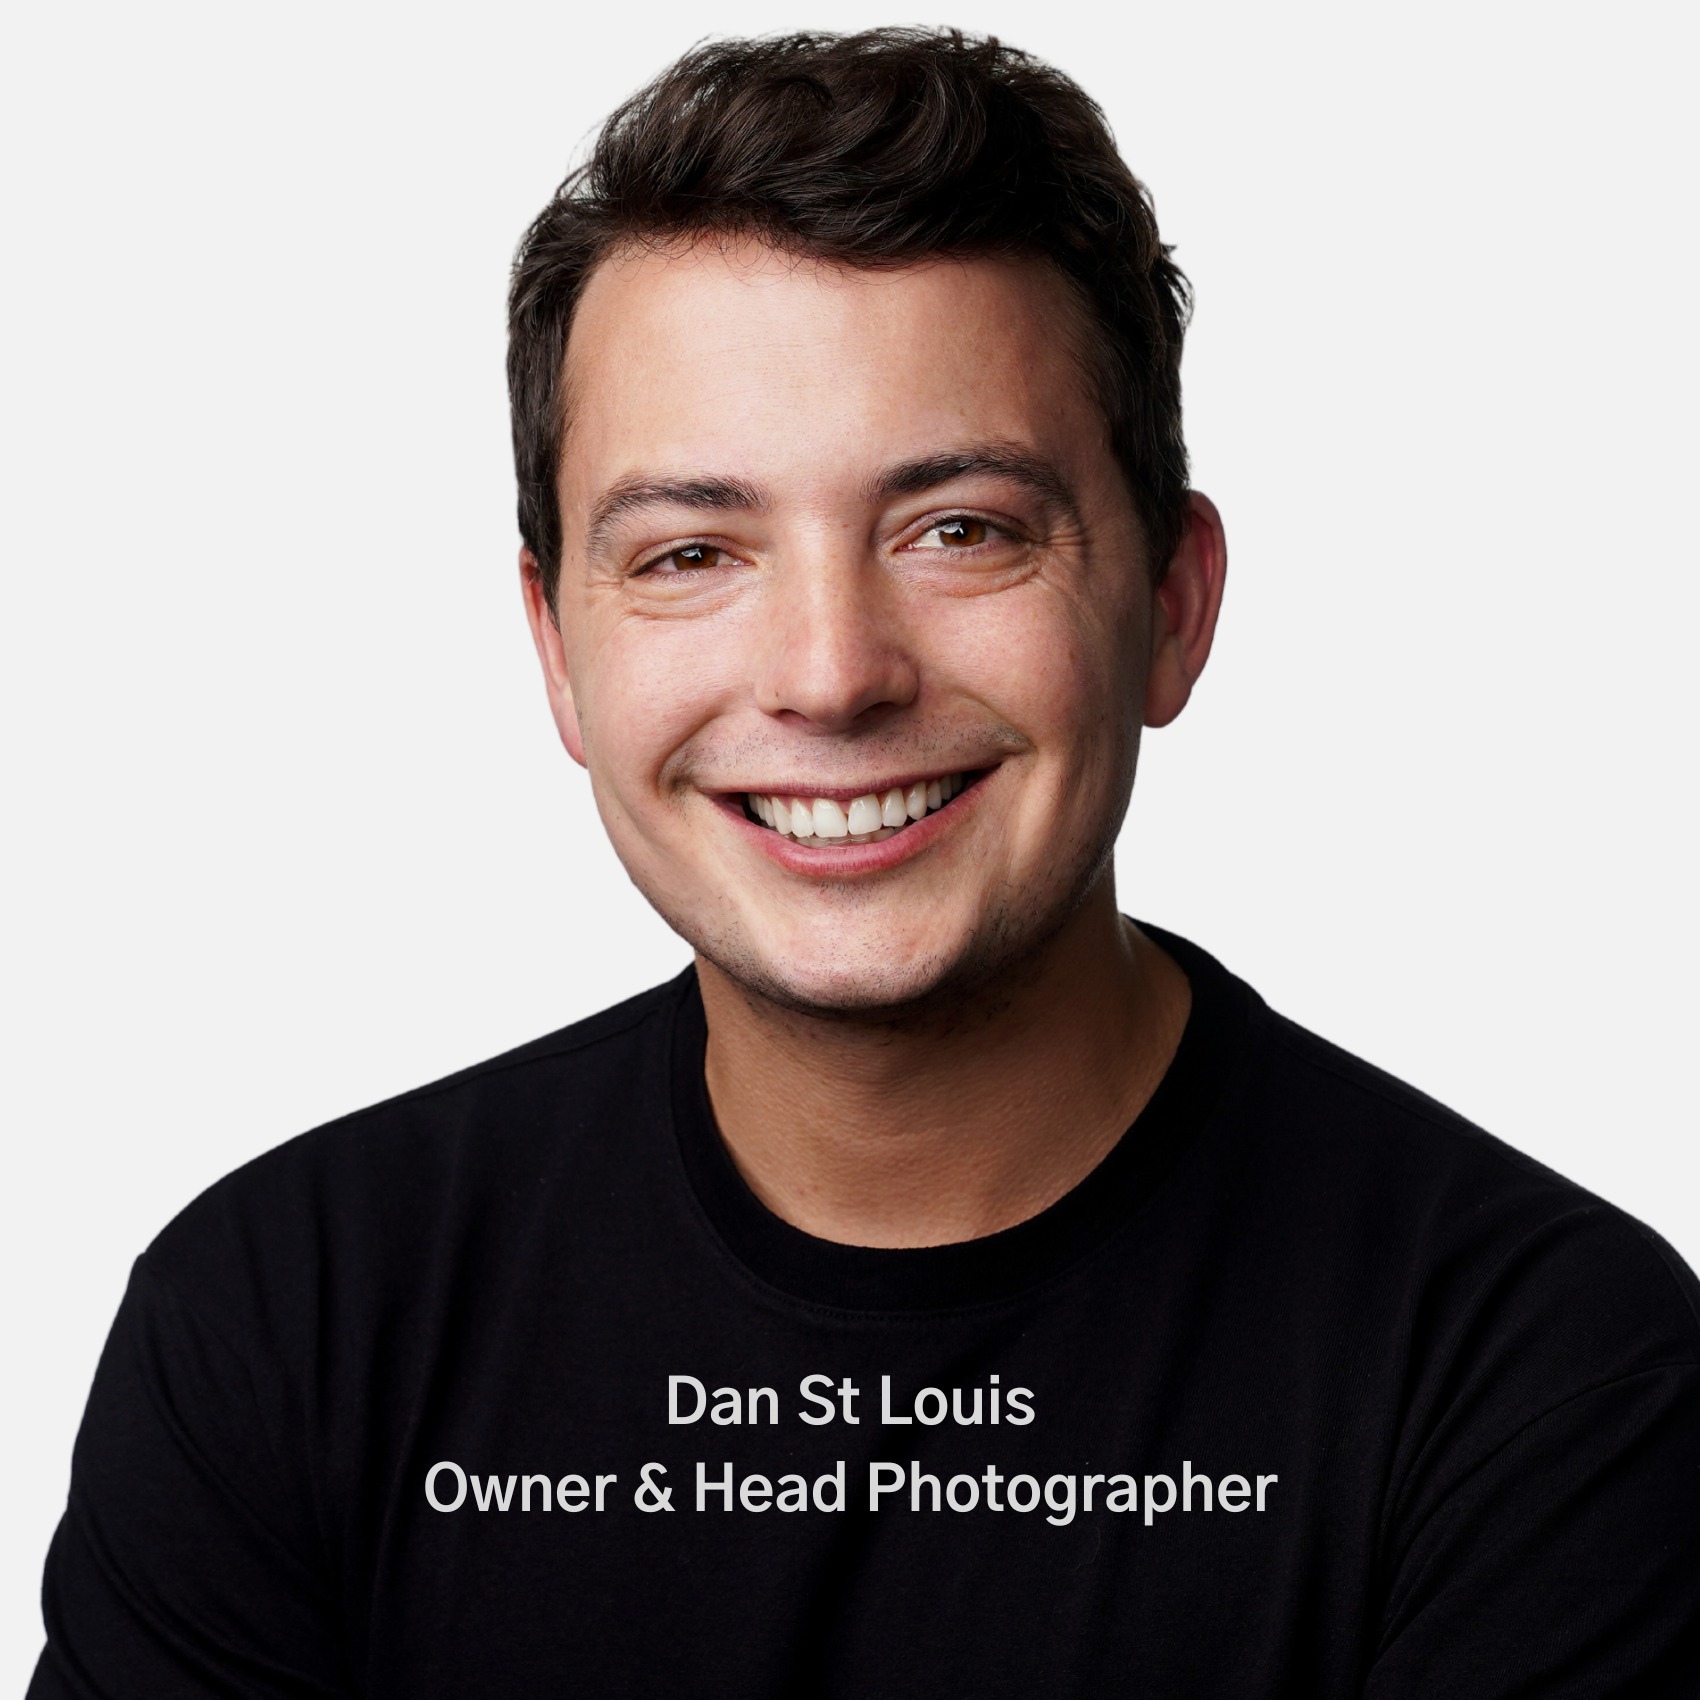 dan st louis owner and head photographer